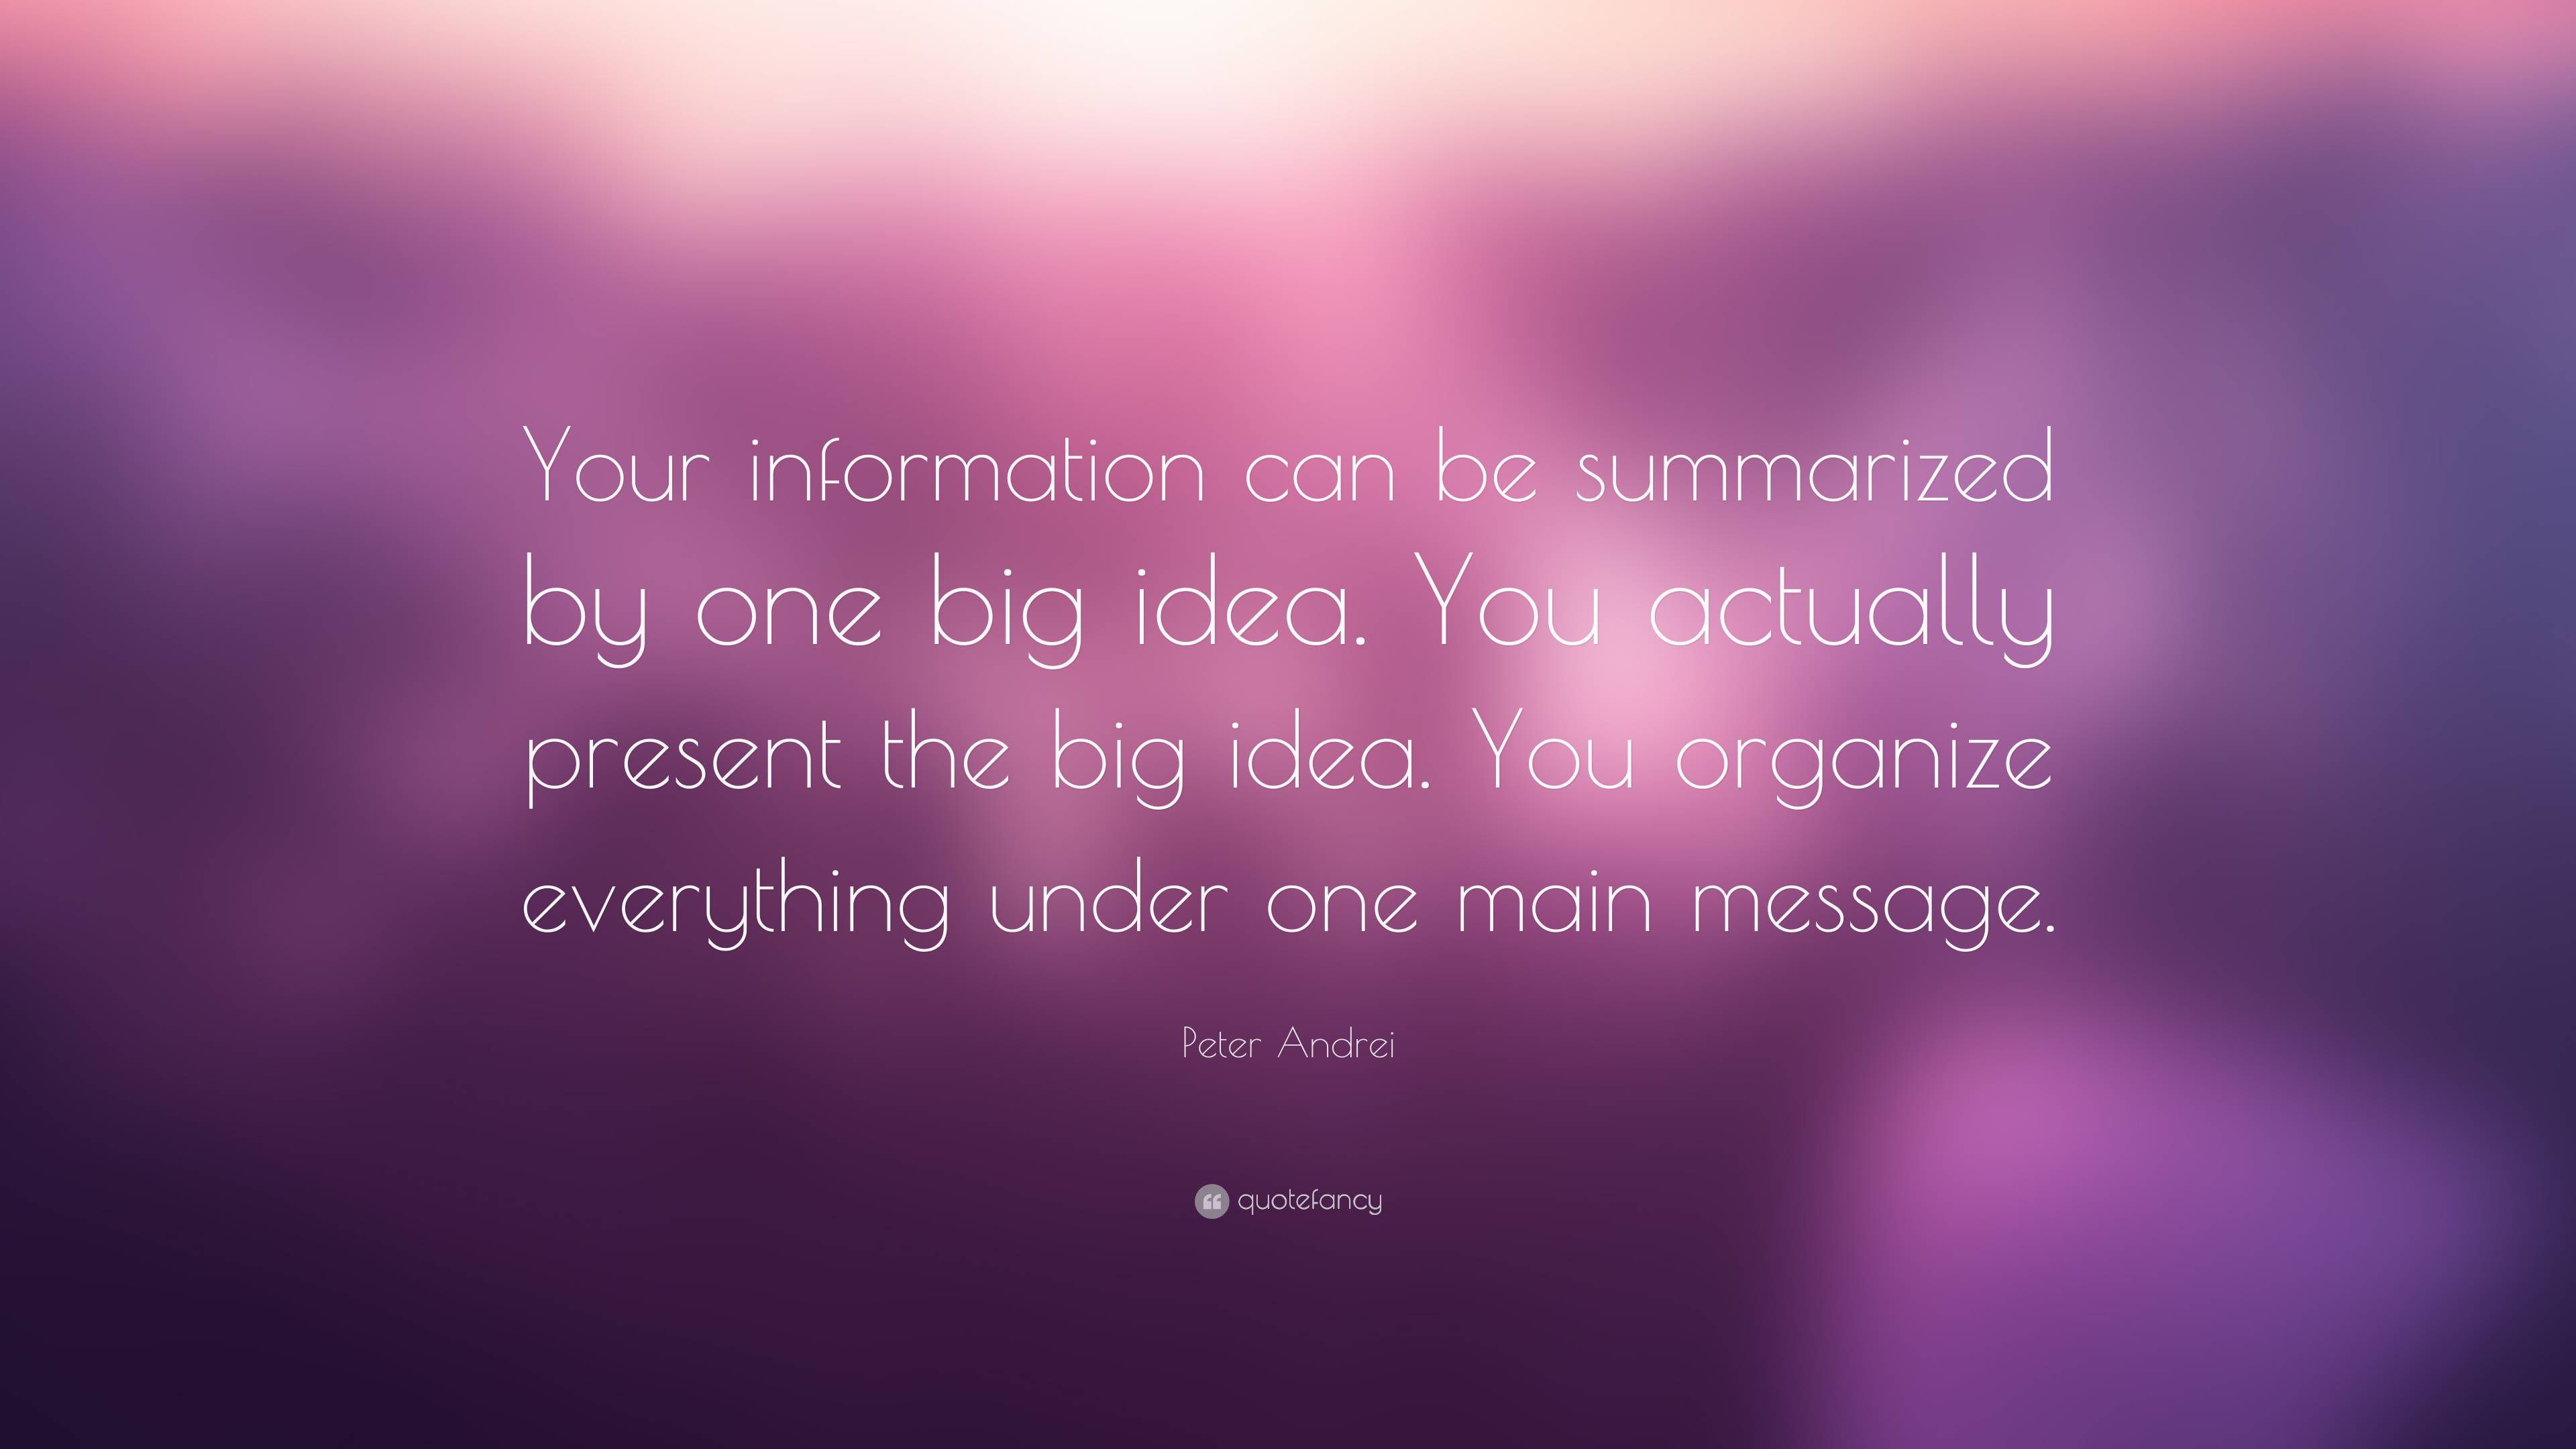 Peter Andrei Quote: “Your information can be summarized by one big idea ...